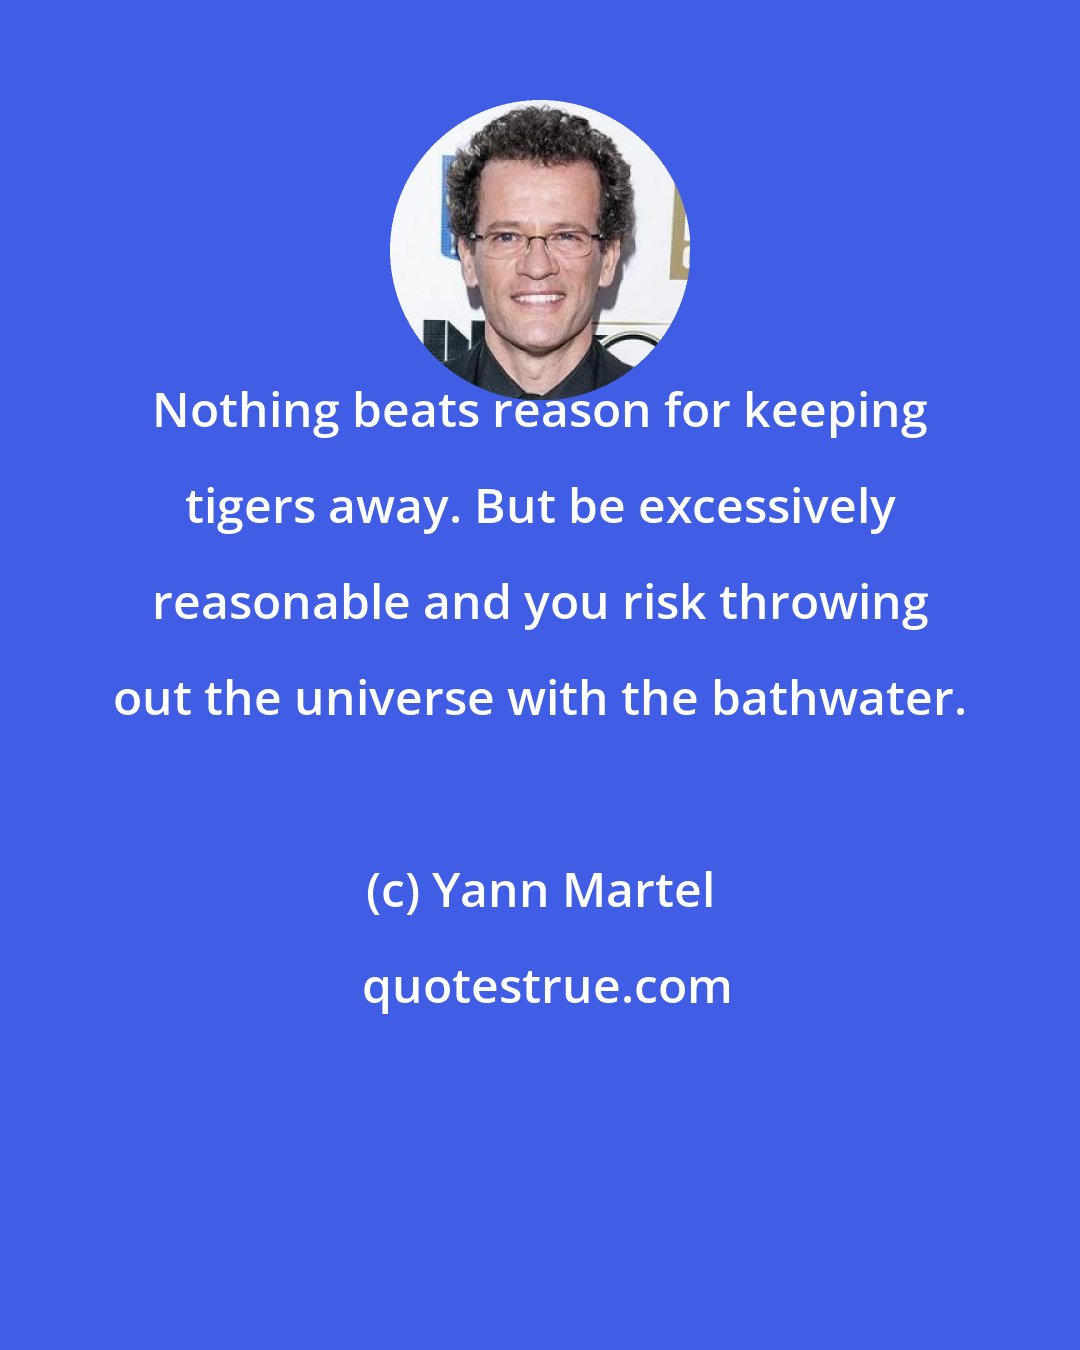 Yann Martel: Nothing beats reason for keeping tigers away. But be excessively reasonable and you risk throwing out the universe with the bathwater.